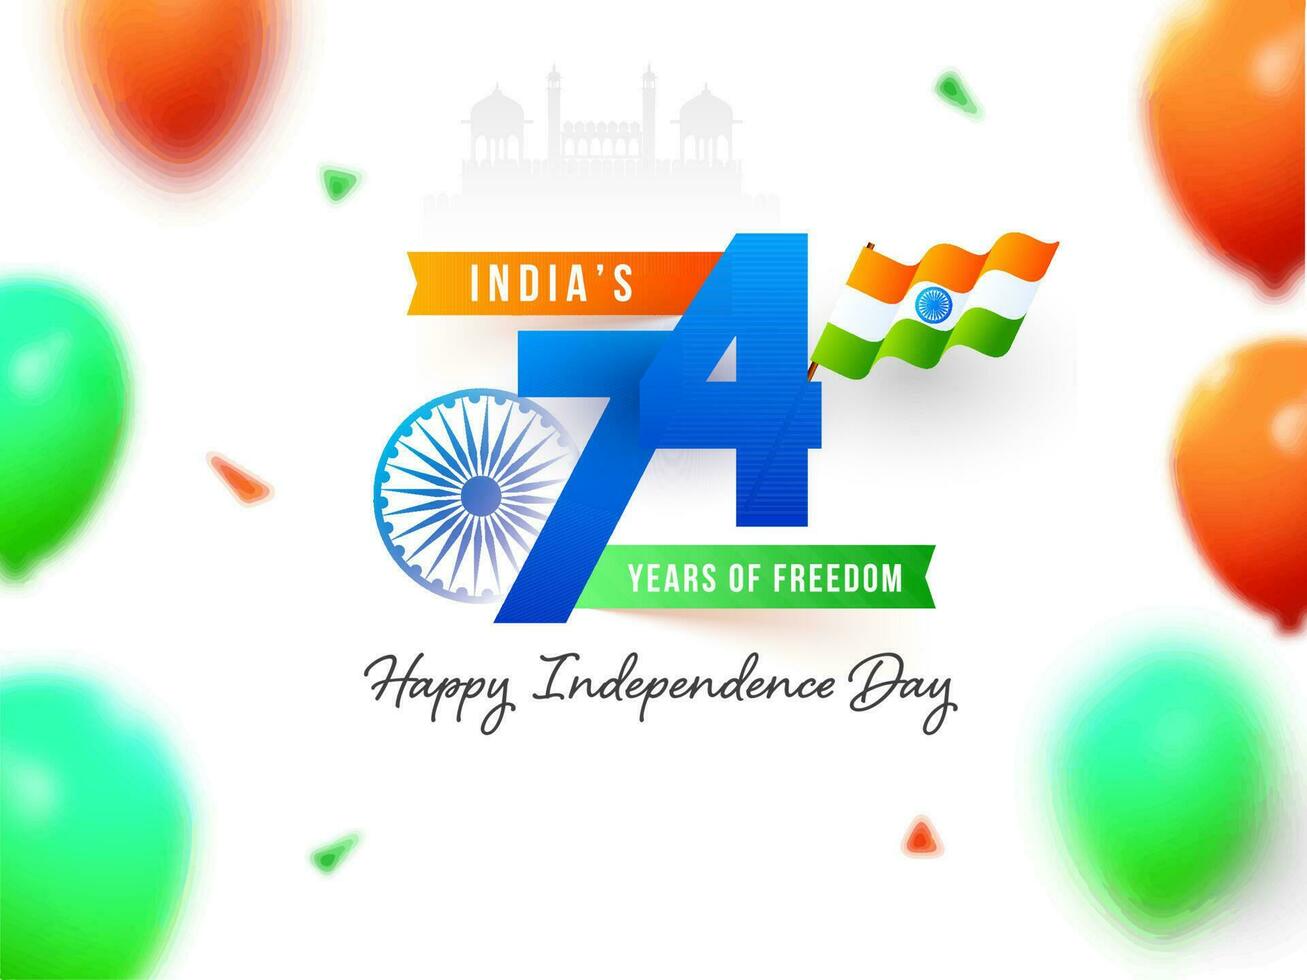 Indias 74 Years Of Freedom Text With Indian Flag And Blur Balloons On White Background For Happy independence Day. vector